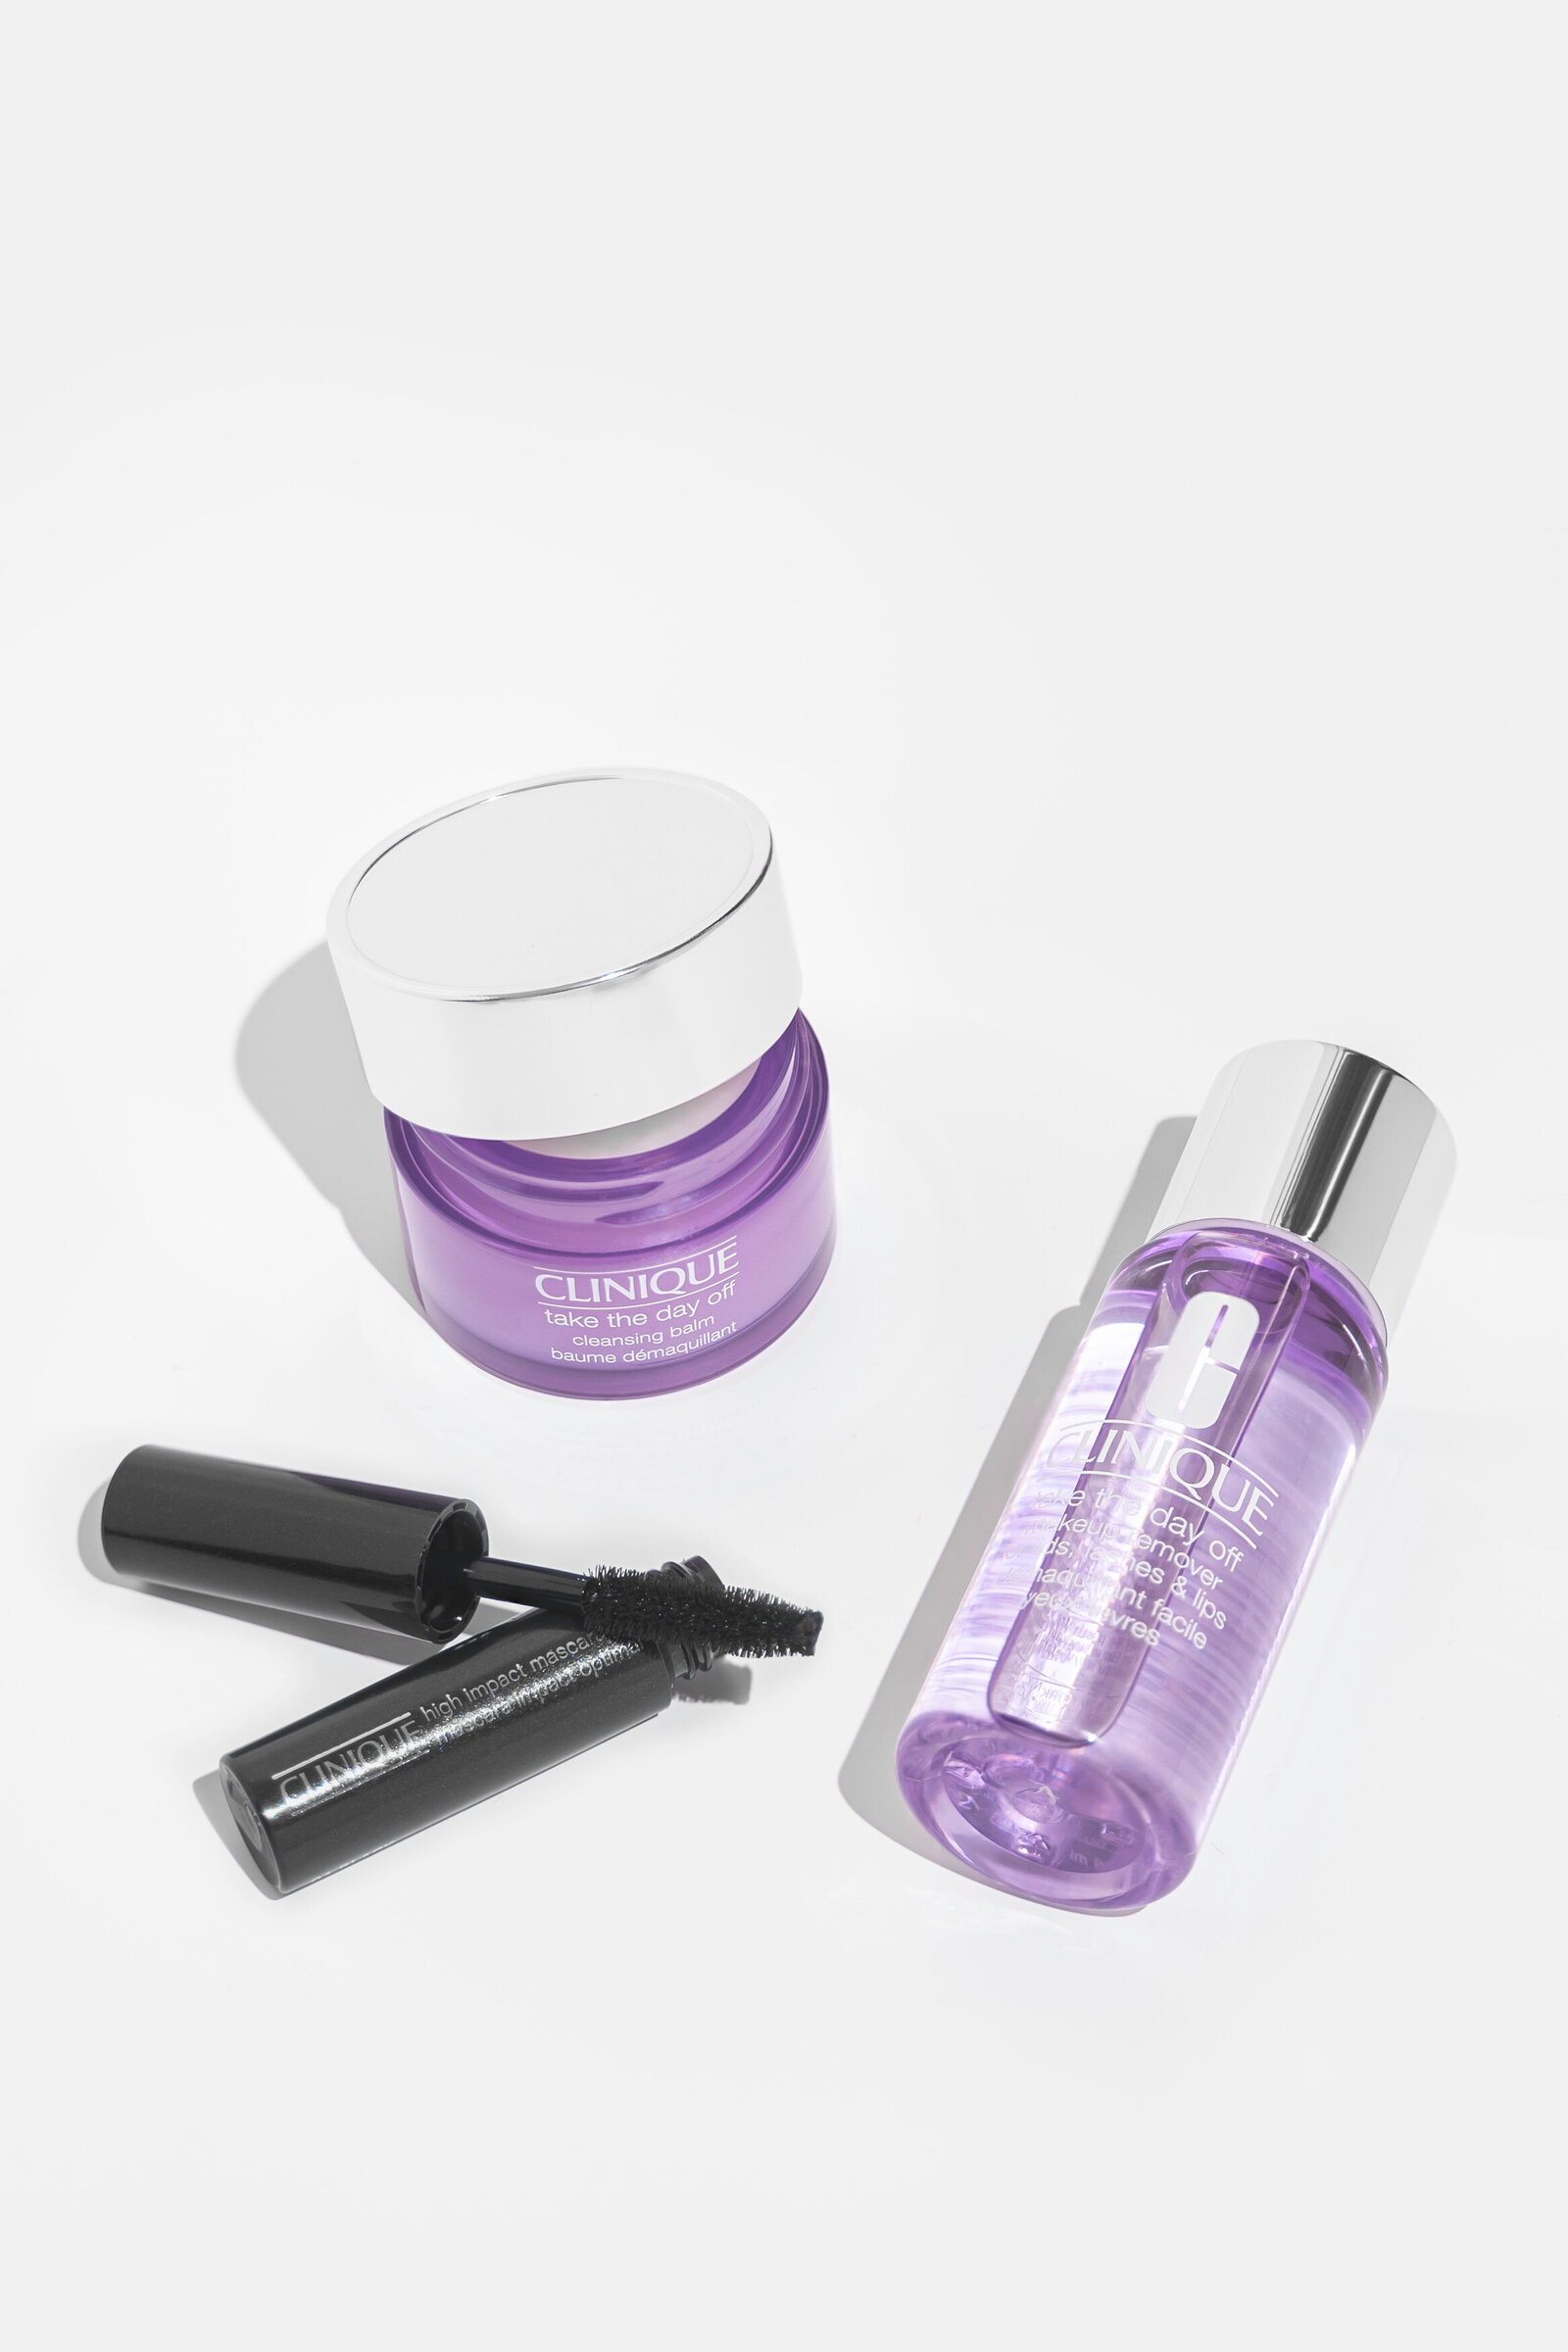 Clinique-Product-Photography